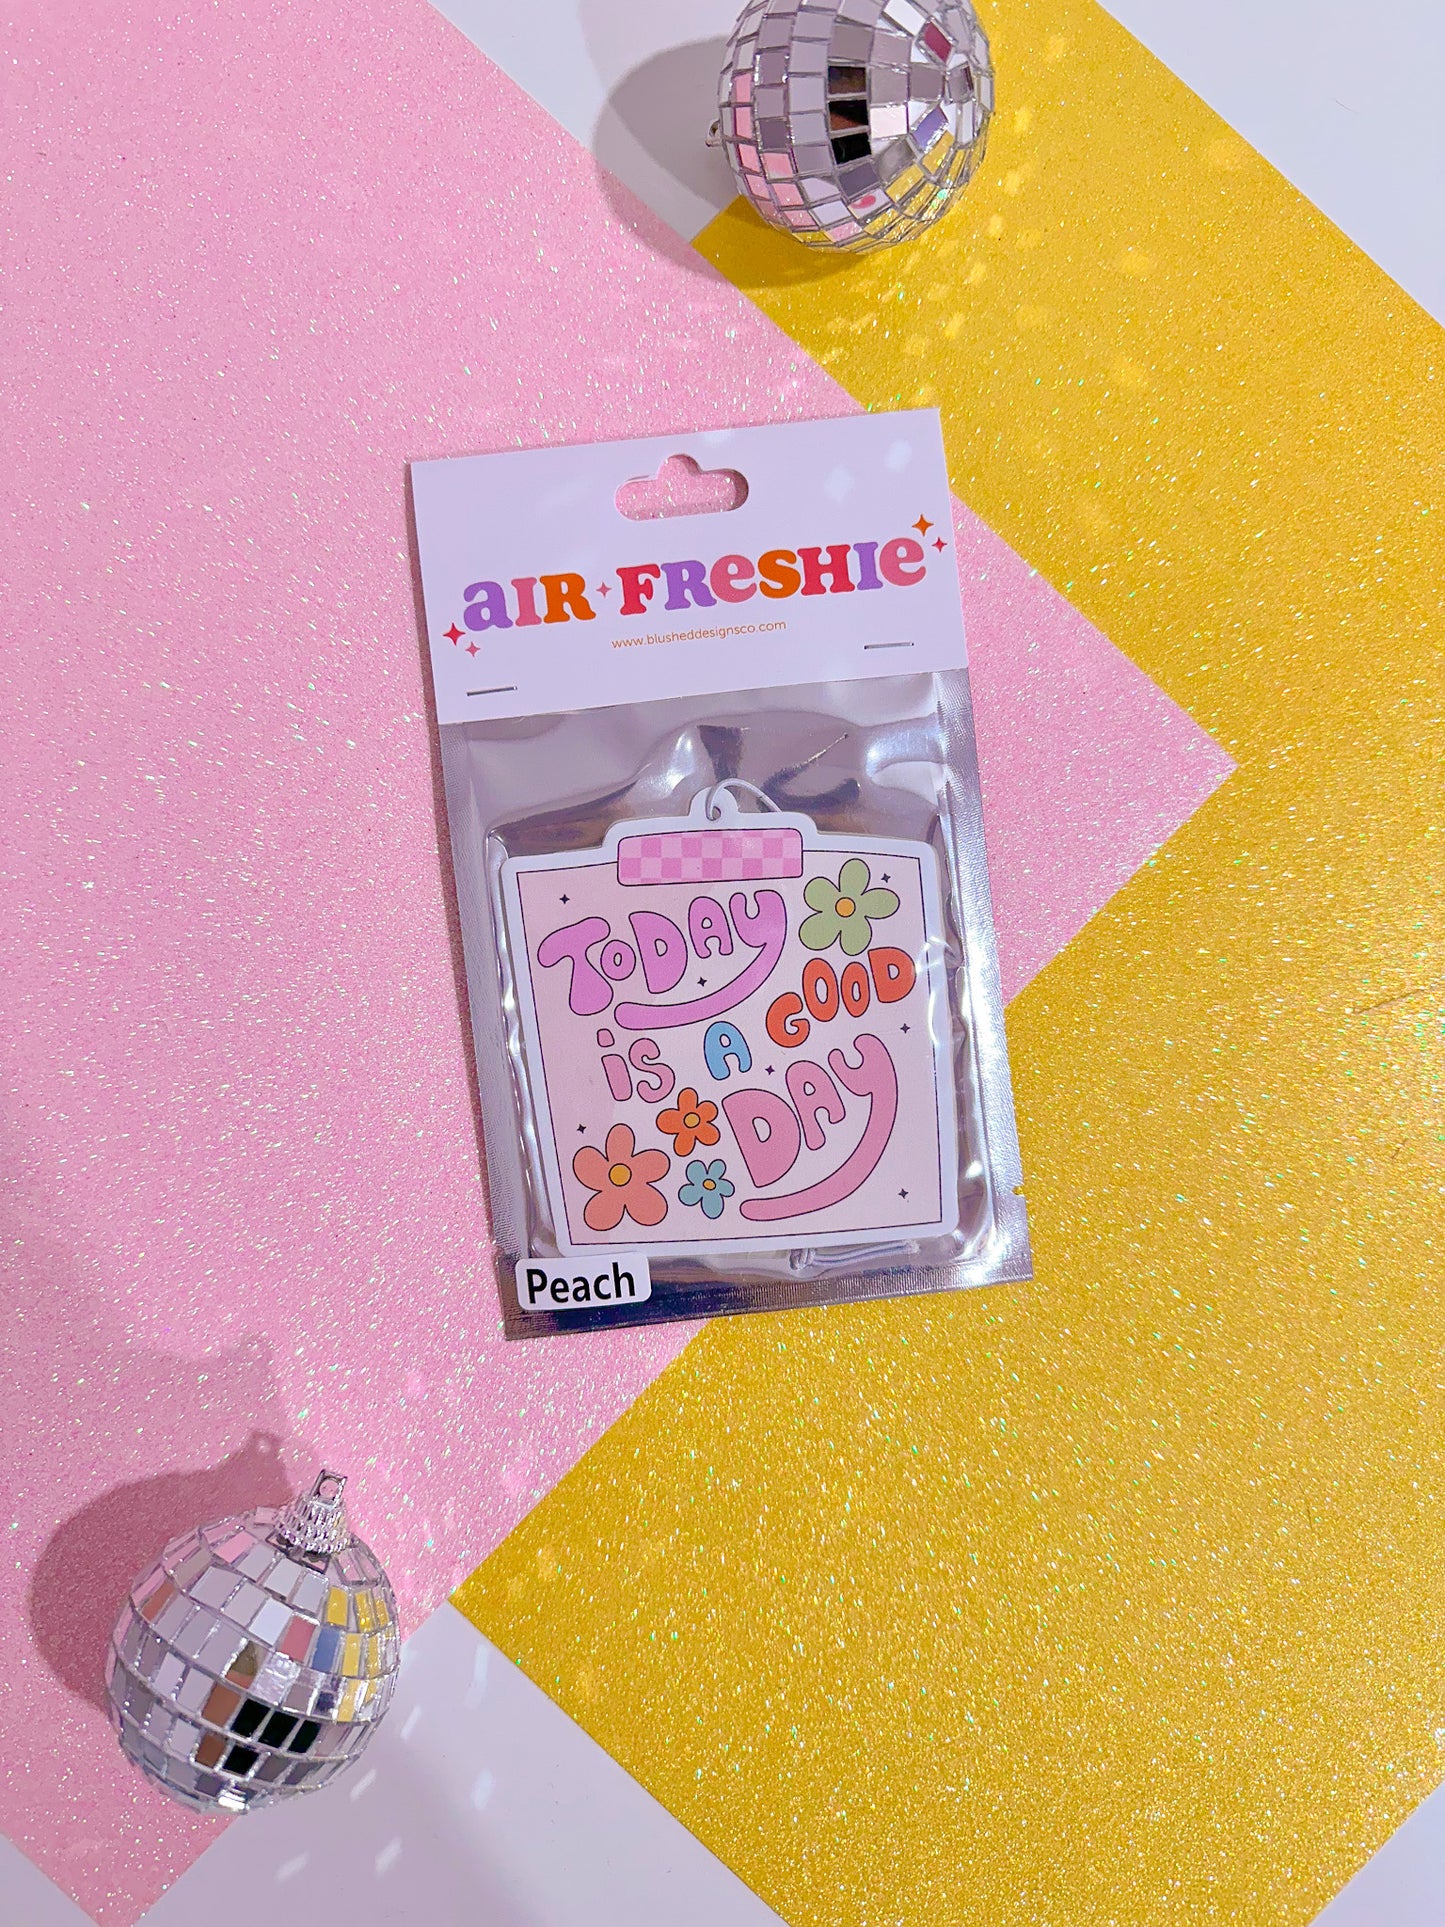 Today is a Good Day Sticky Note Air Freshener (Peach Scent)